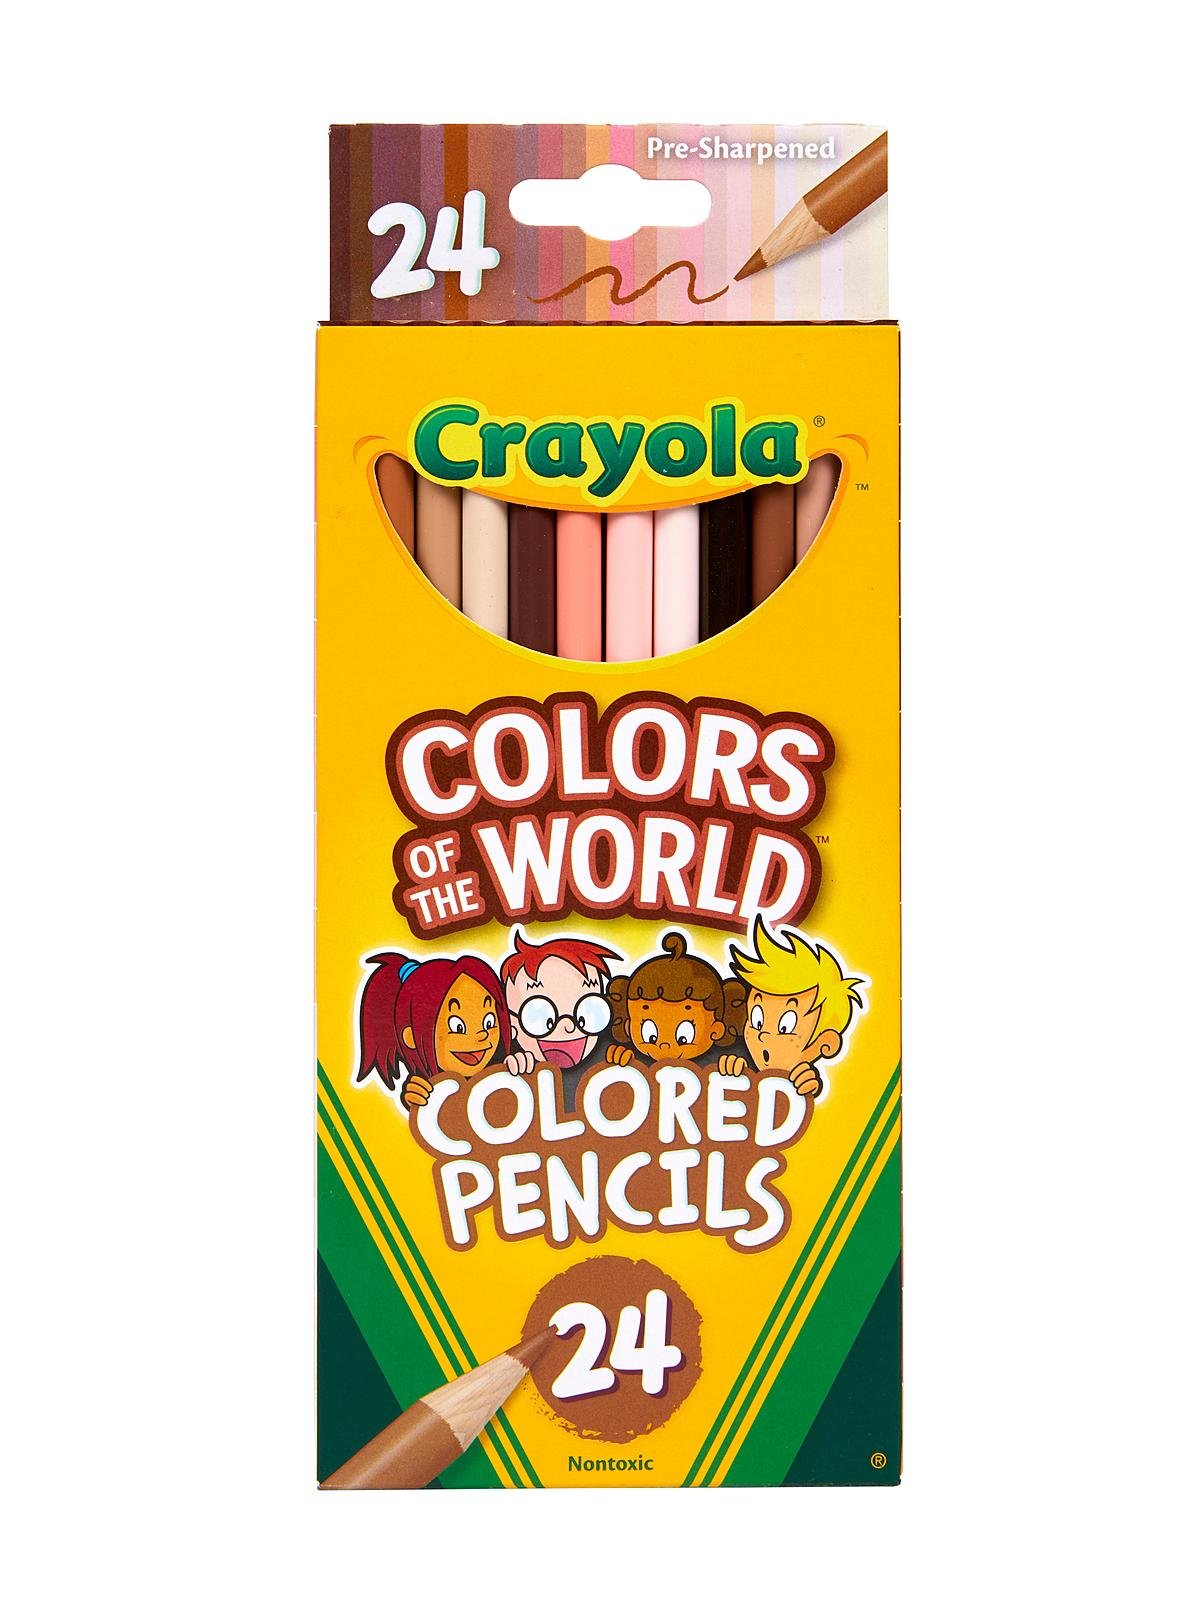 Crayola Colors of the World Colored Pencils